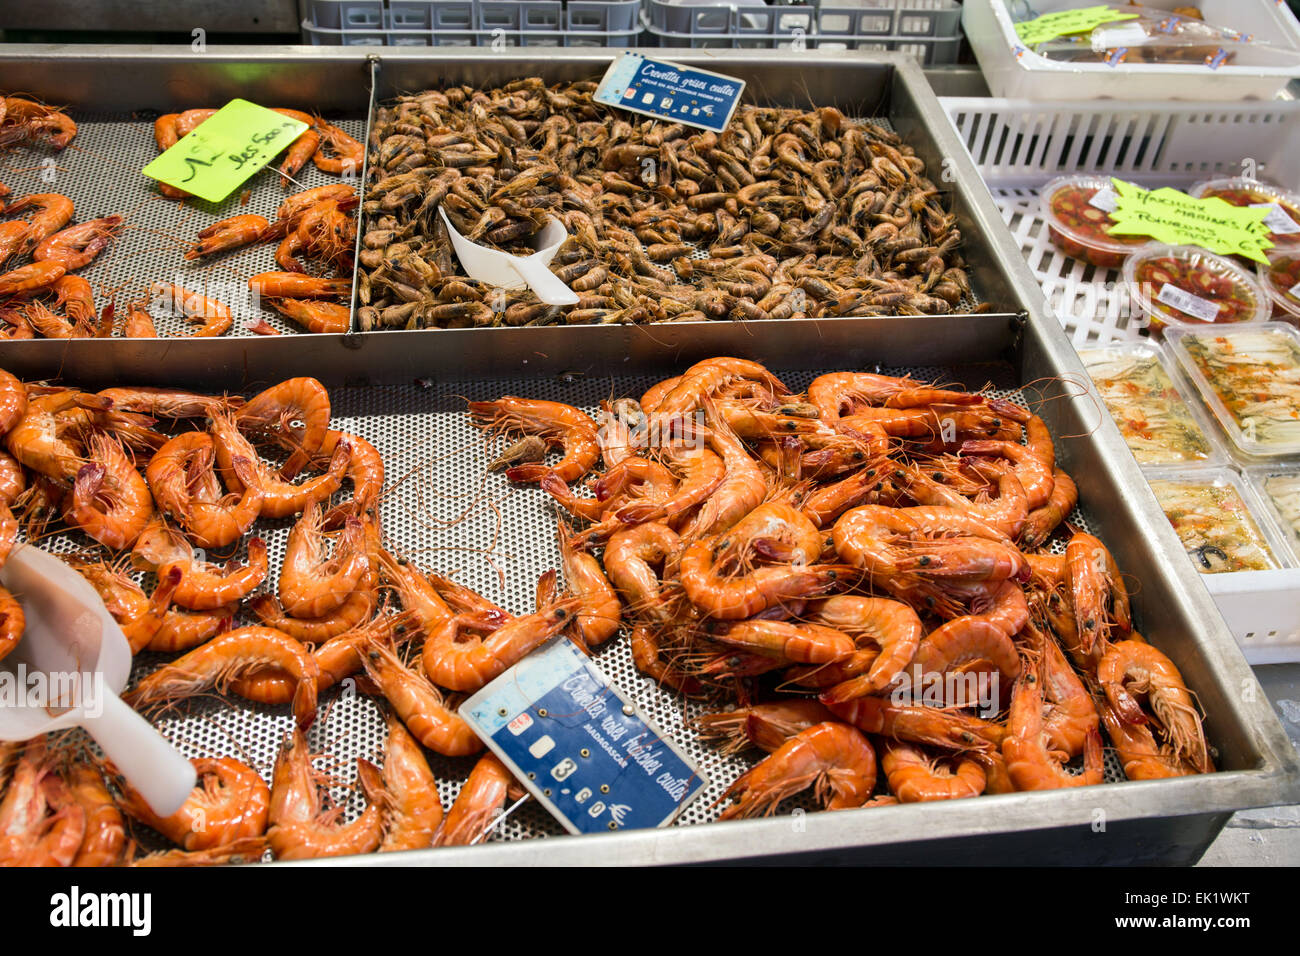 Seafood market stall at Trouville Sur Mer, Northern France, Europe Stock Photo